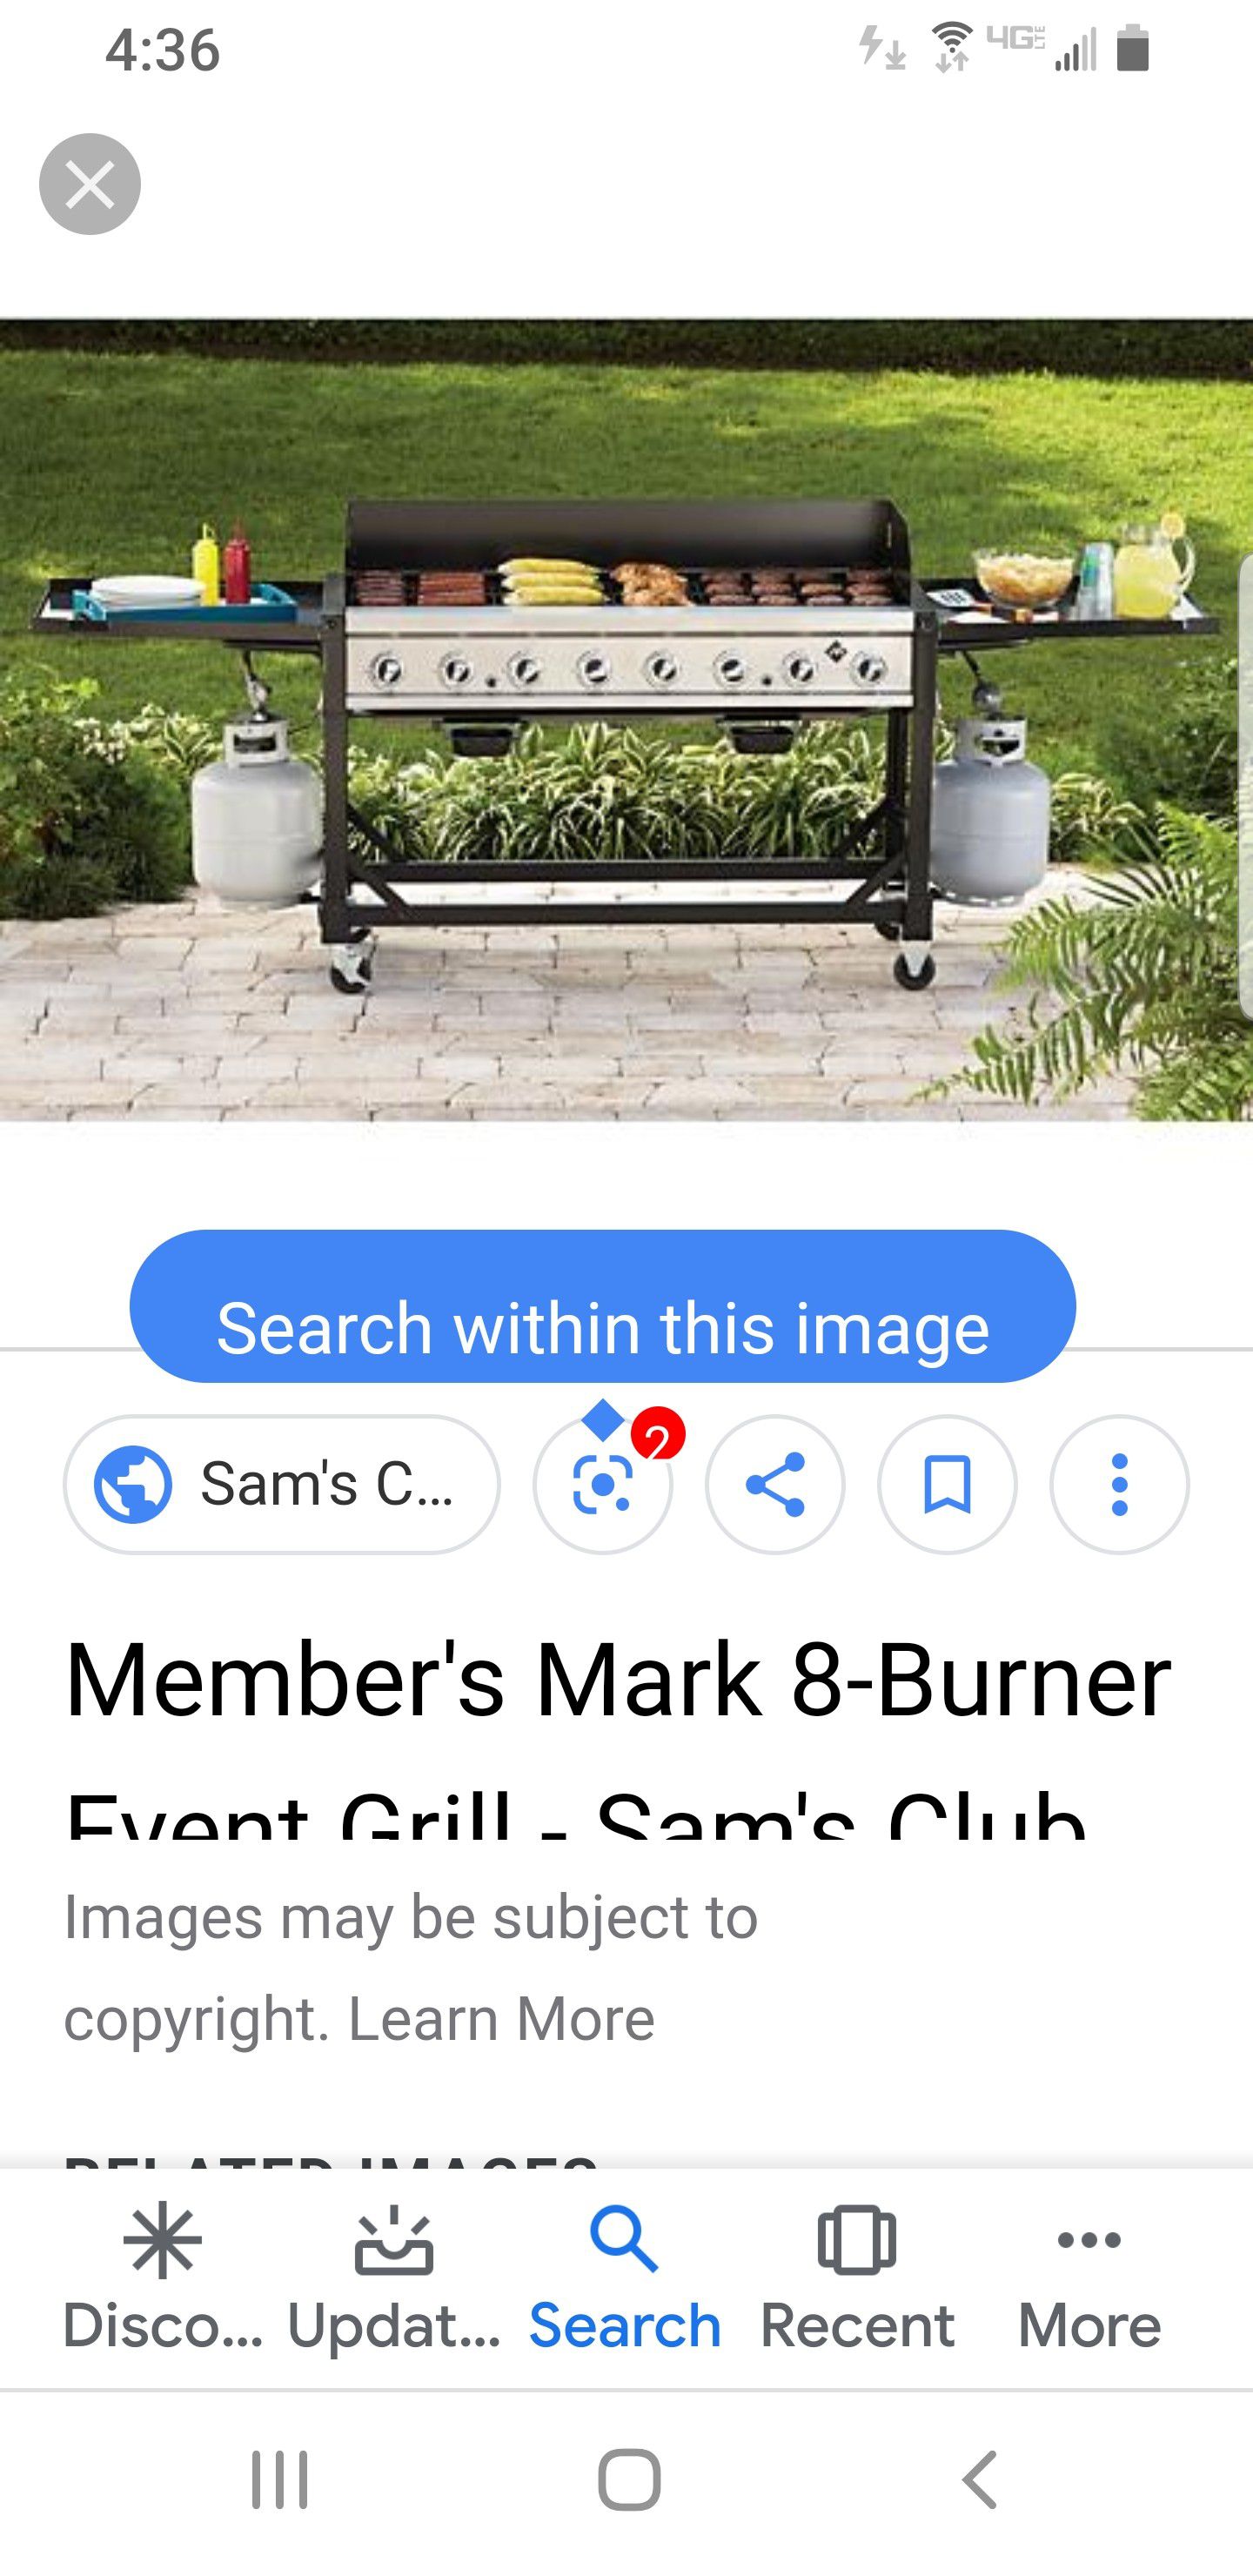 EVENT GRILL